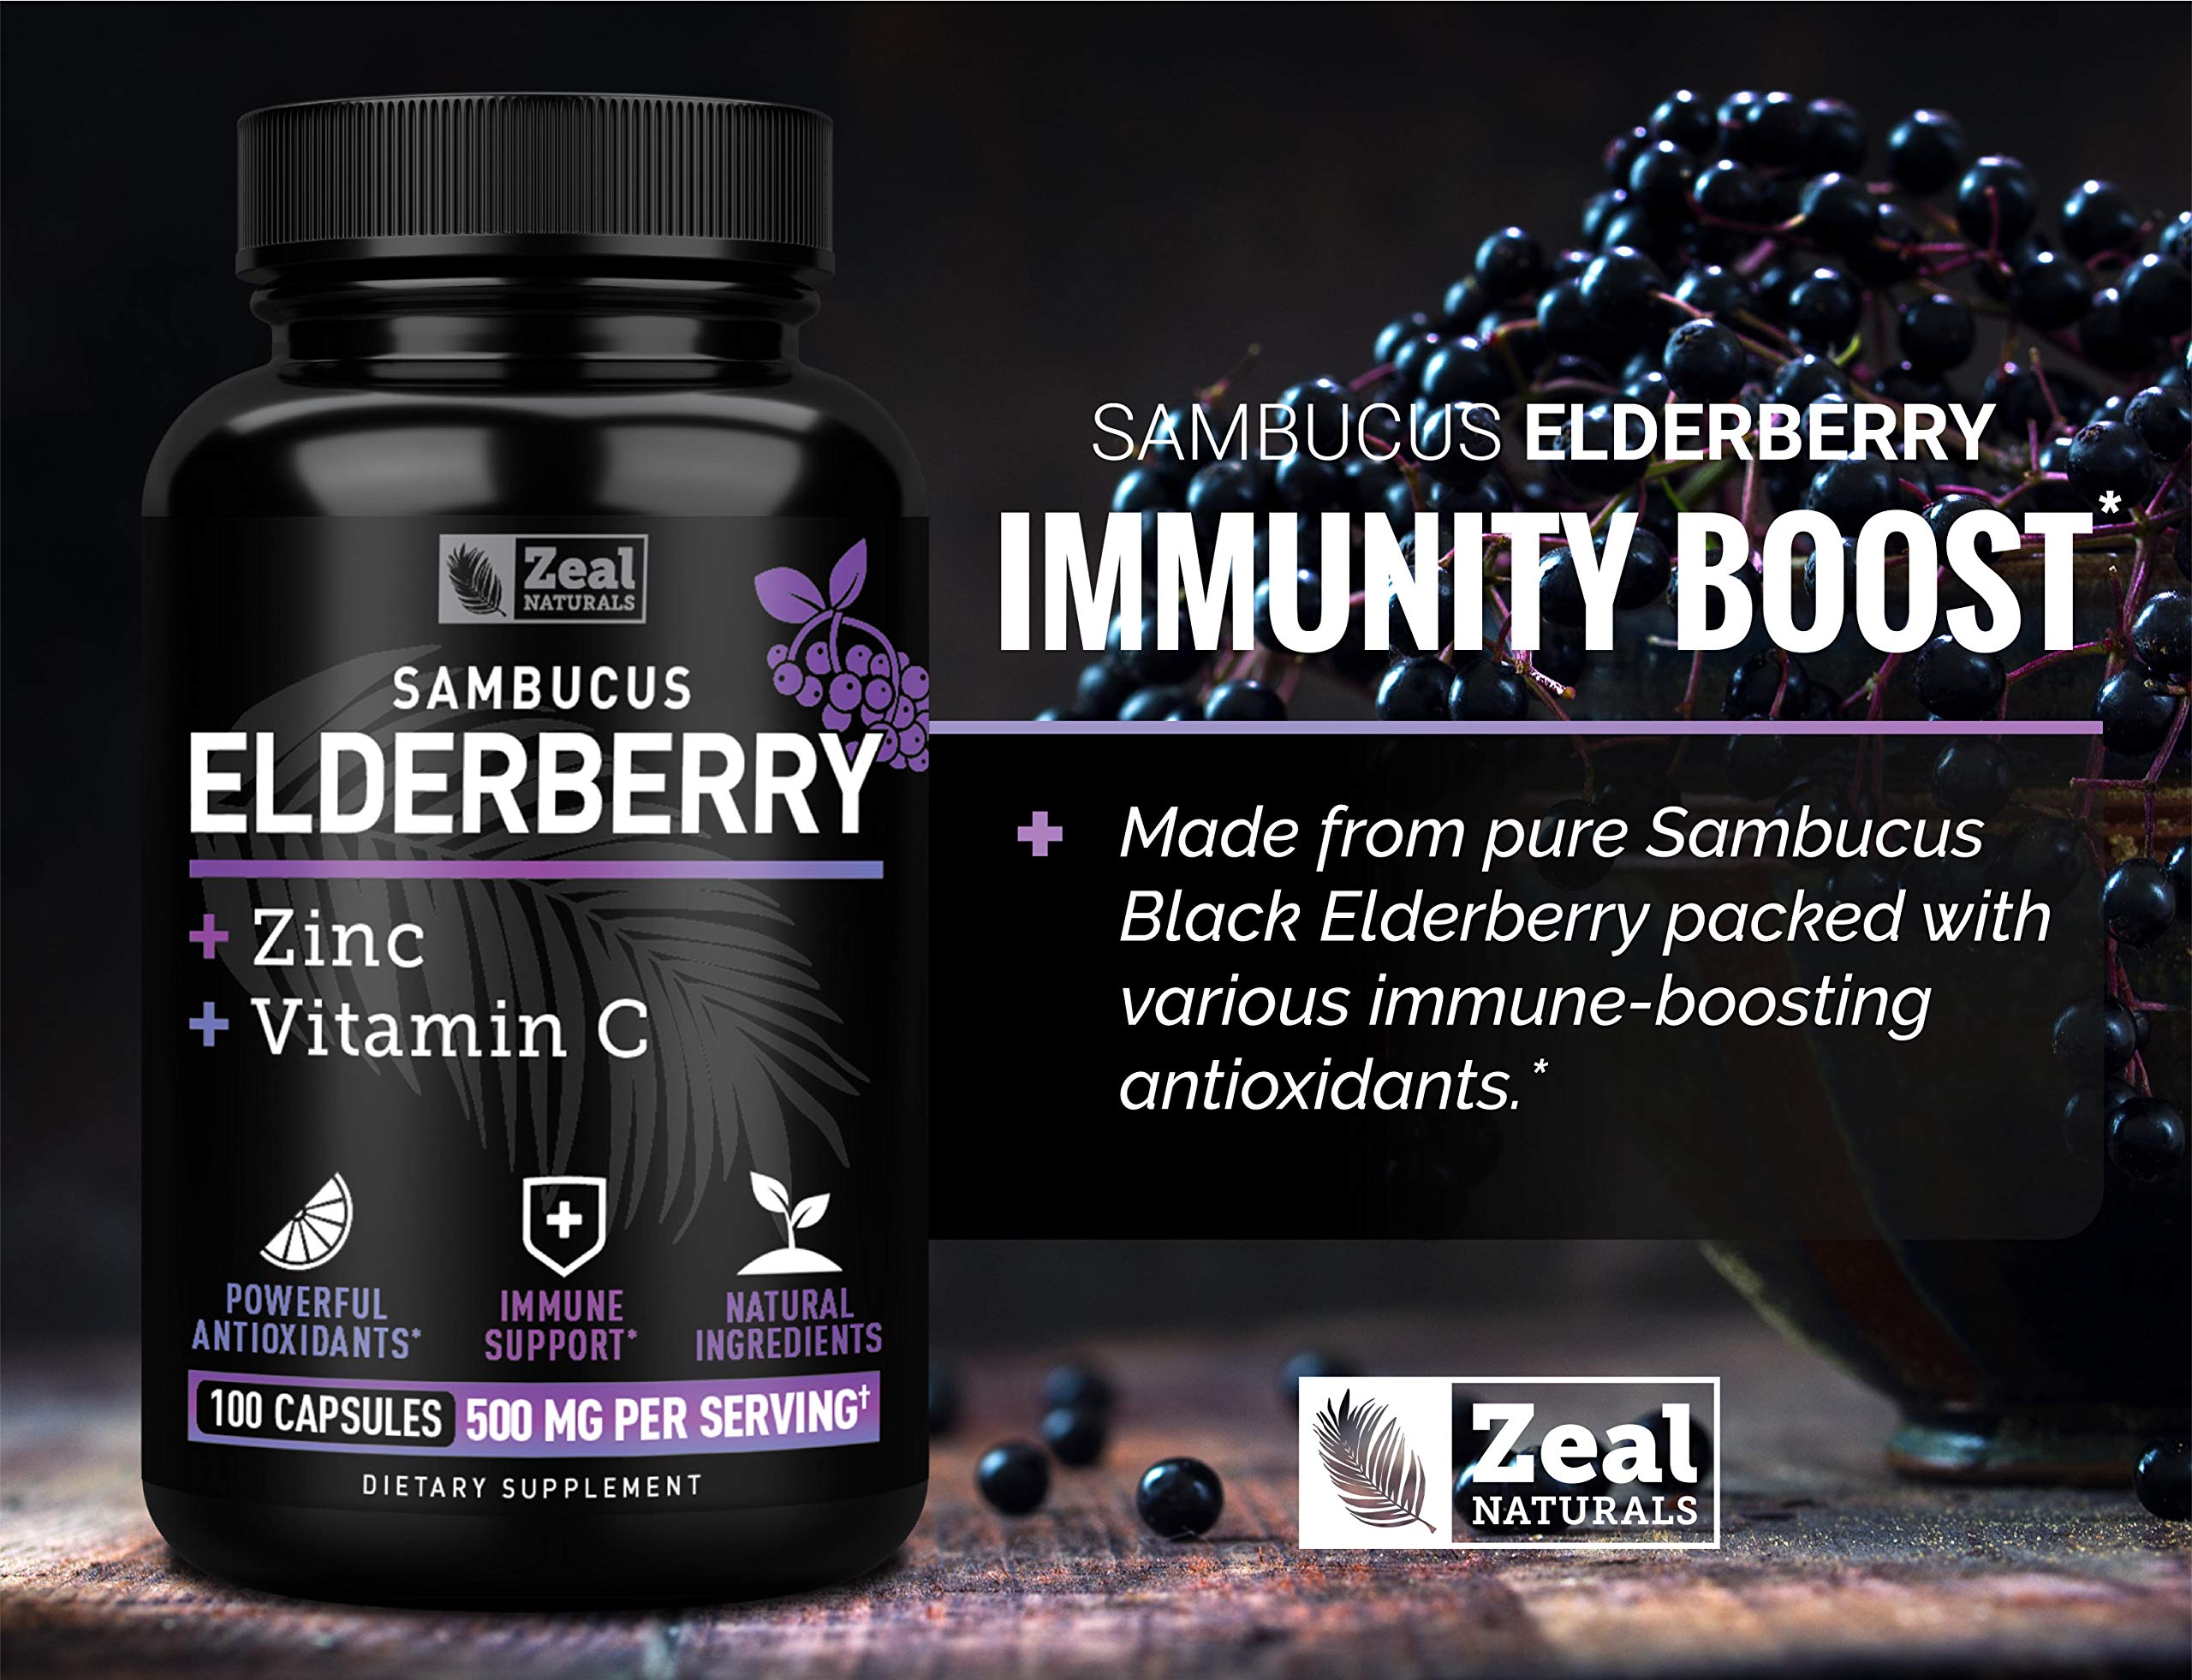 Zeal Naturals Max Strength Elderberry Capsules + Zinc + Vitamin C | 500mg for Immune System Support with Black Sambucus Elderberry | 100 Count | 3-in-1 Immune Support for Adults